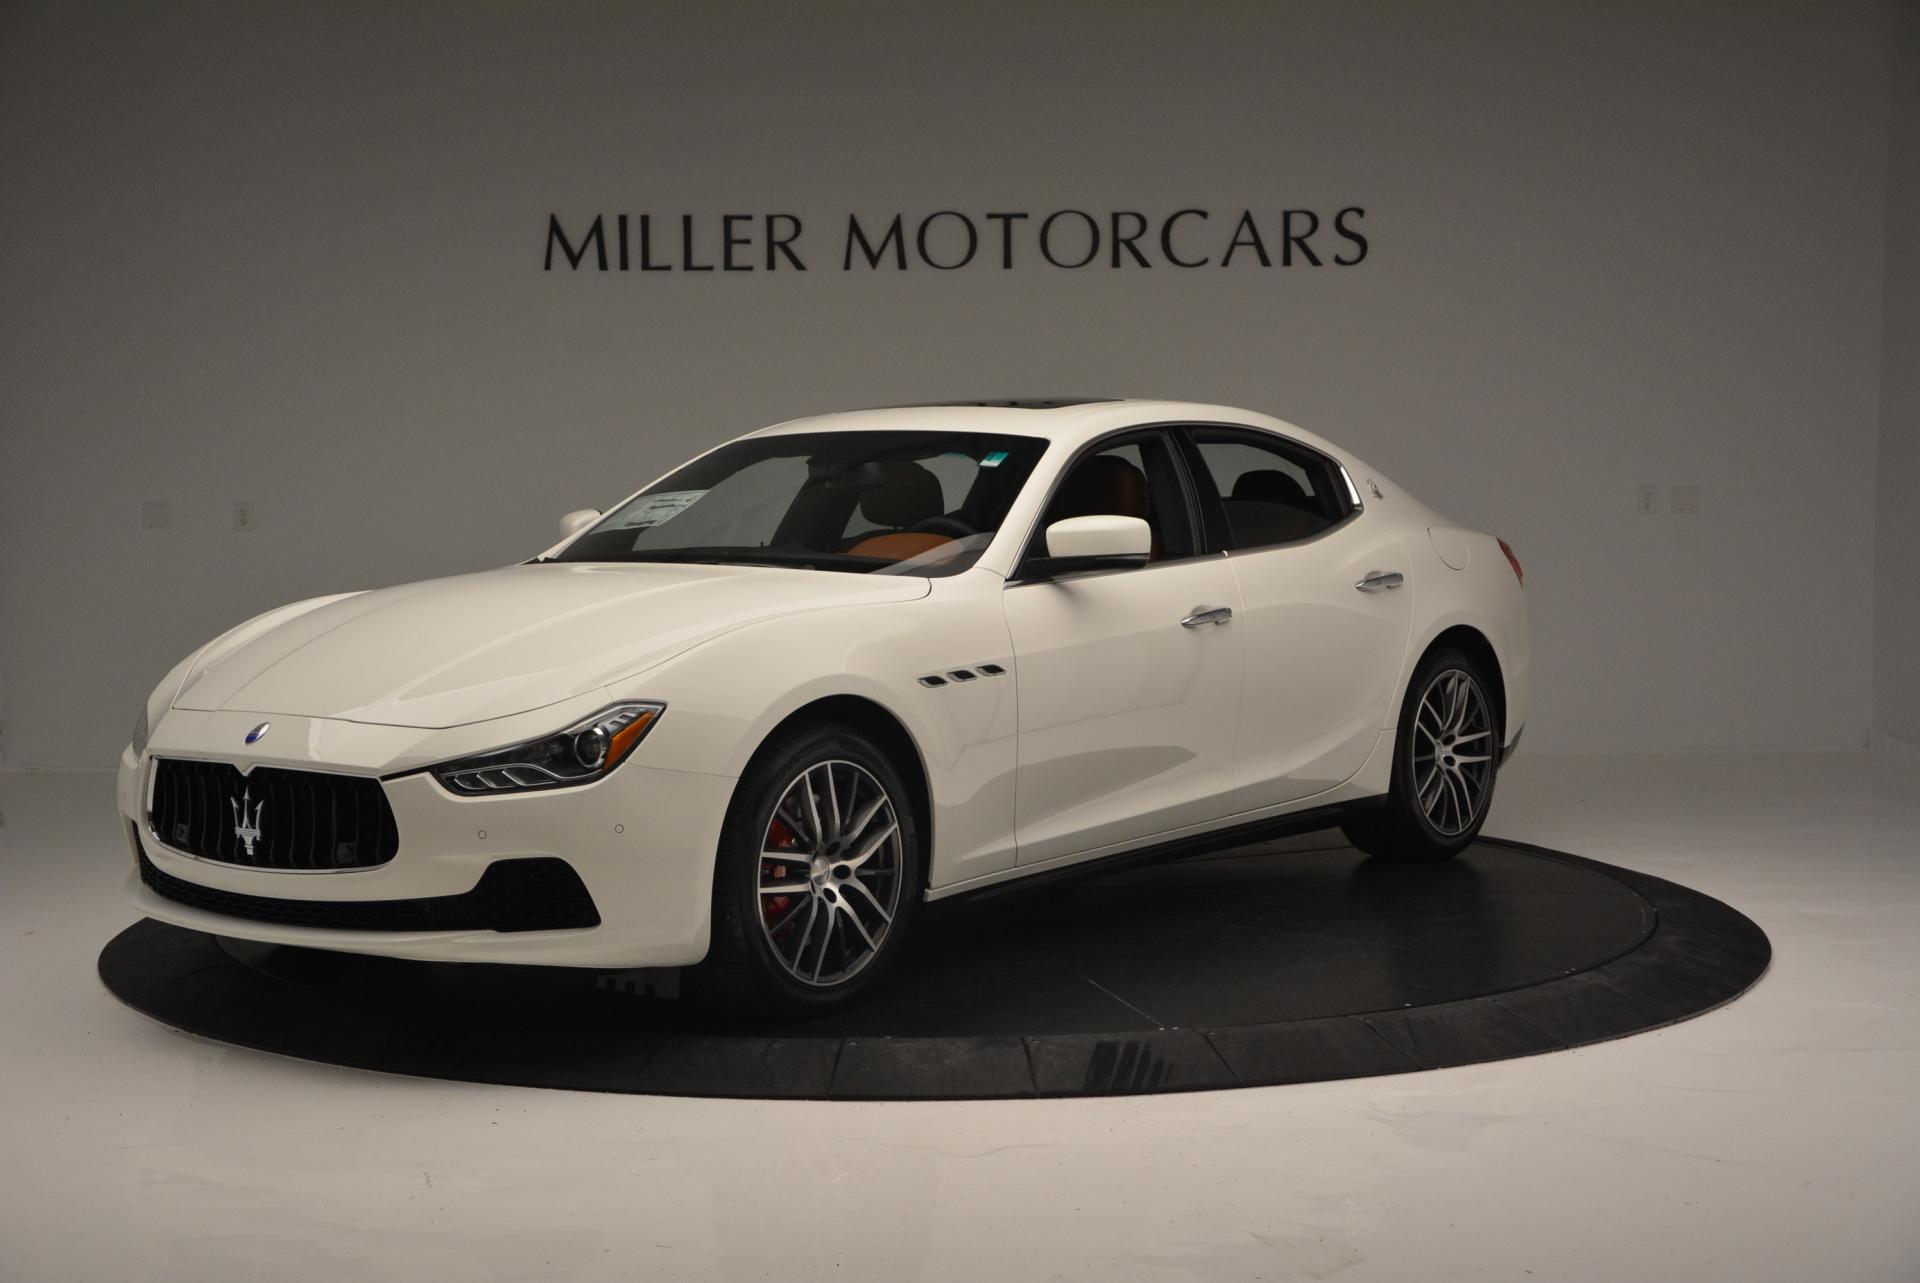 New 2016 Maserati Ghibli S Q4 for sale Sold at Pagani of Greenwich in Greenwich CT 06830 1